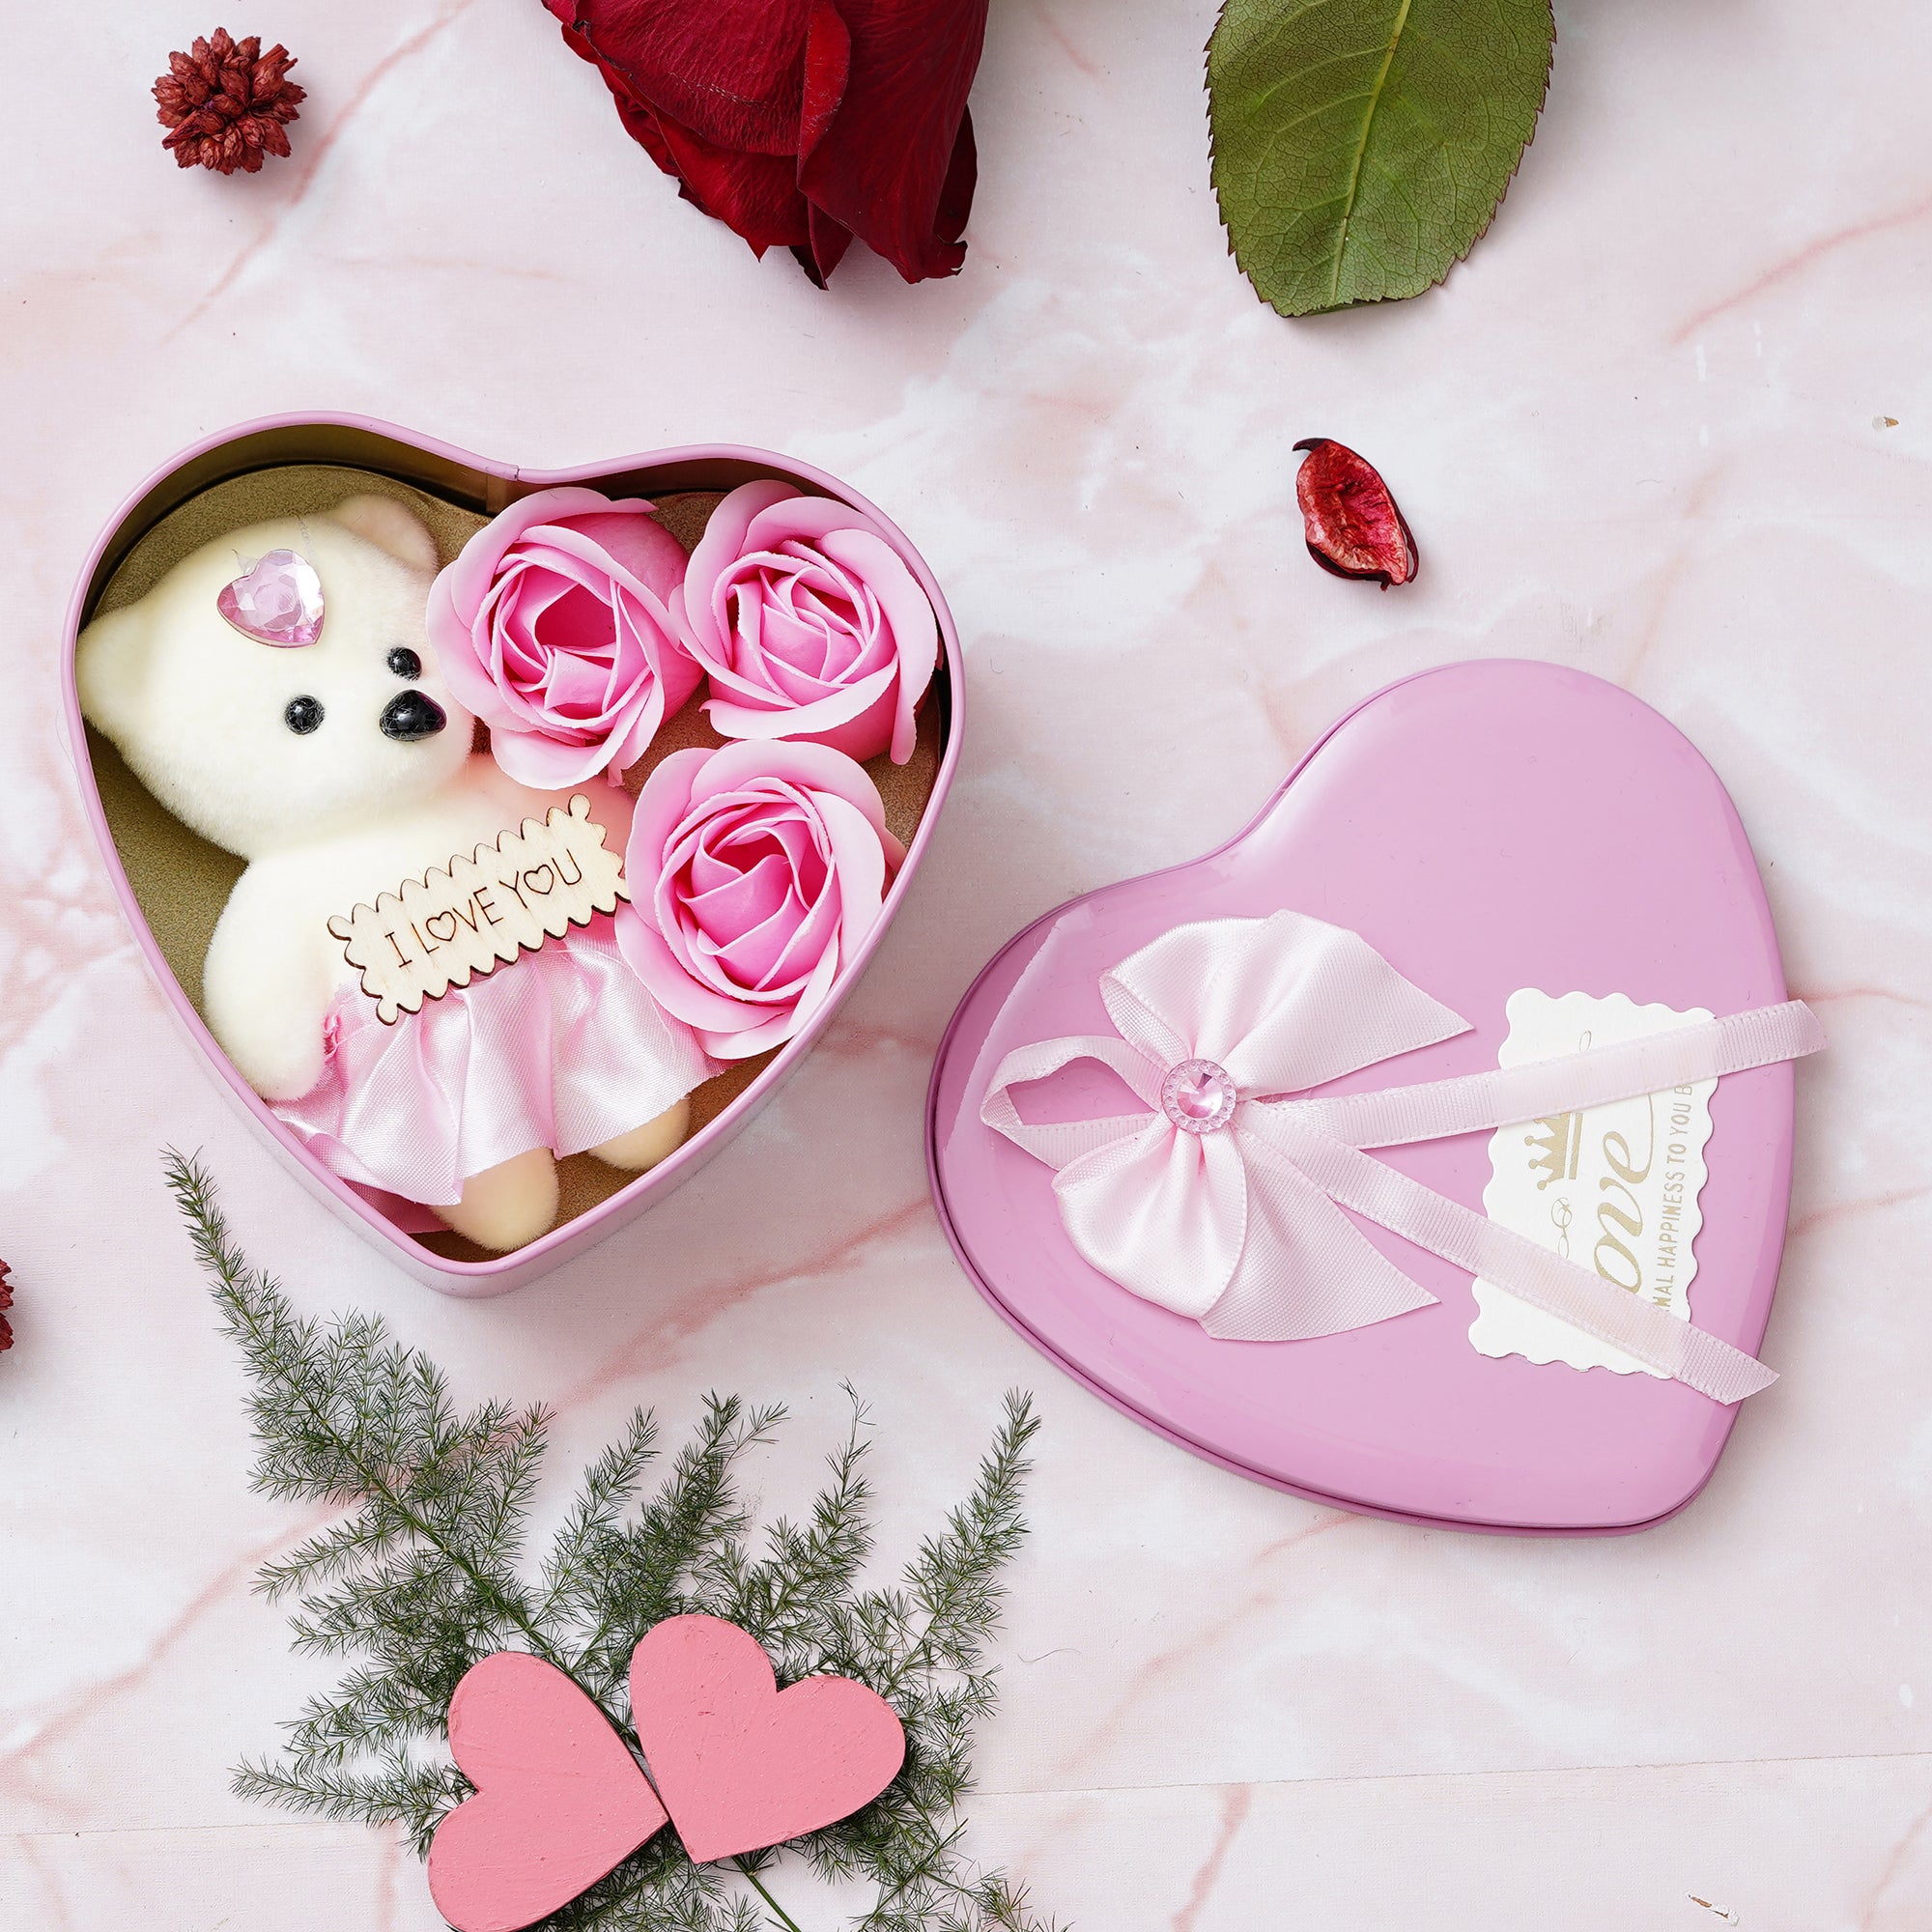 Valentine Combo of Pack of 8 Love Gift Cards, Golden Rose Gift Set, Pink Heart Shaped Gift Box with Teddy and Roses 5